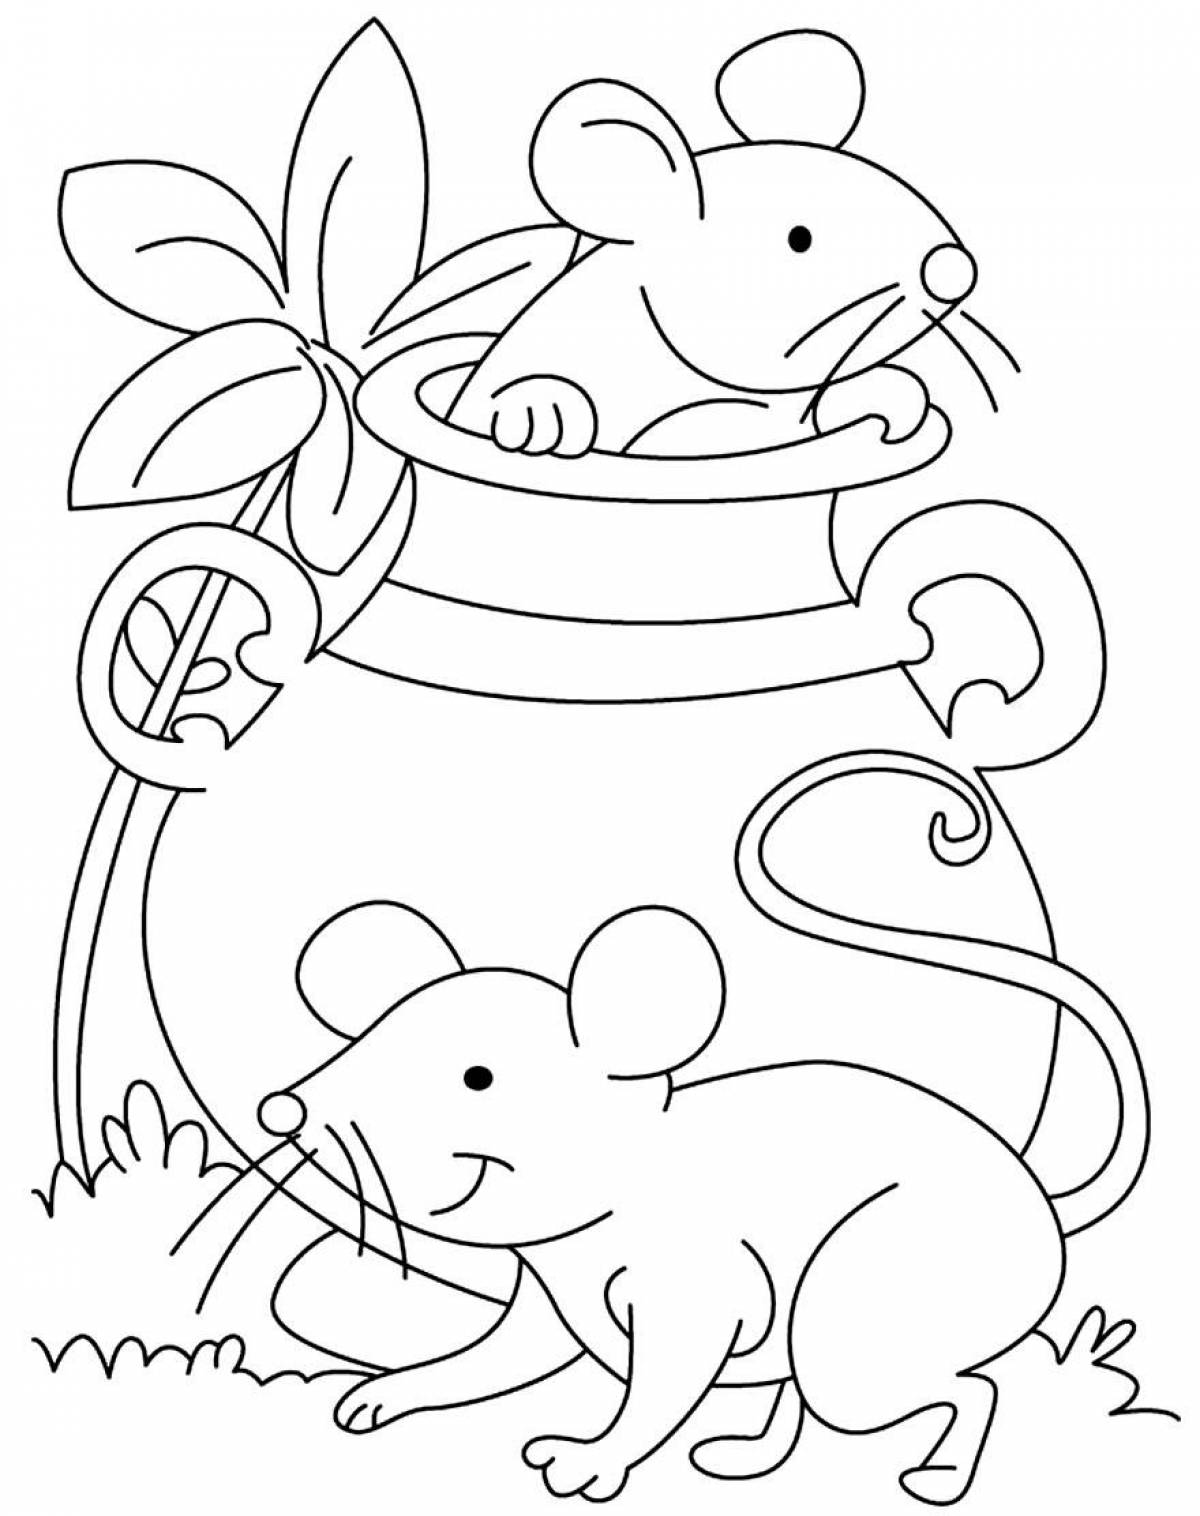 Magic mouse coloring page